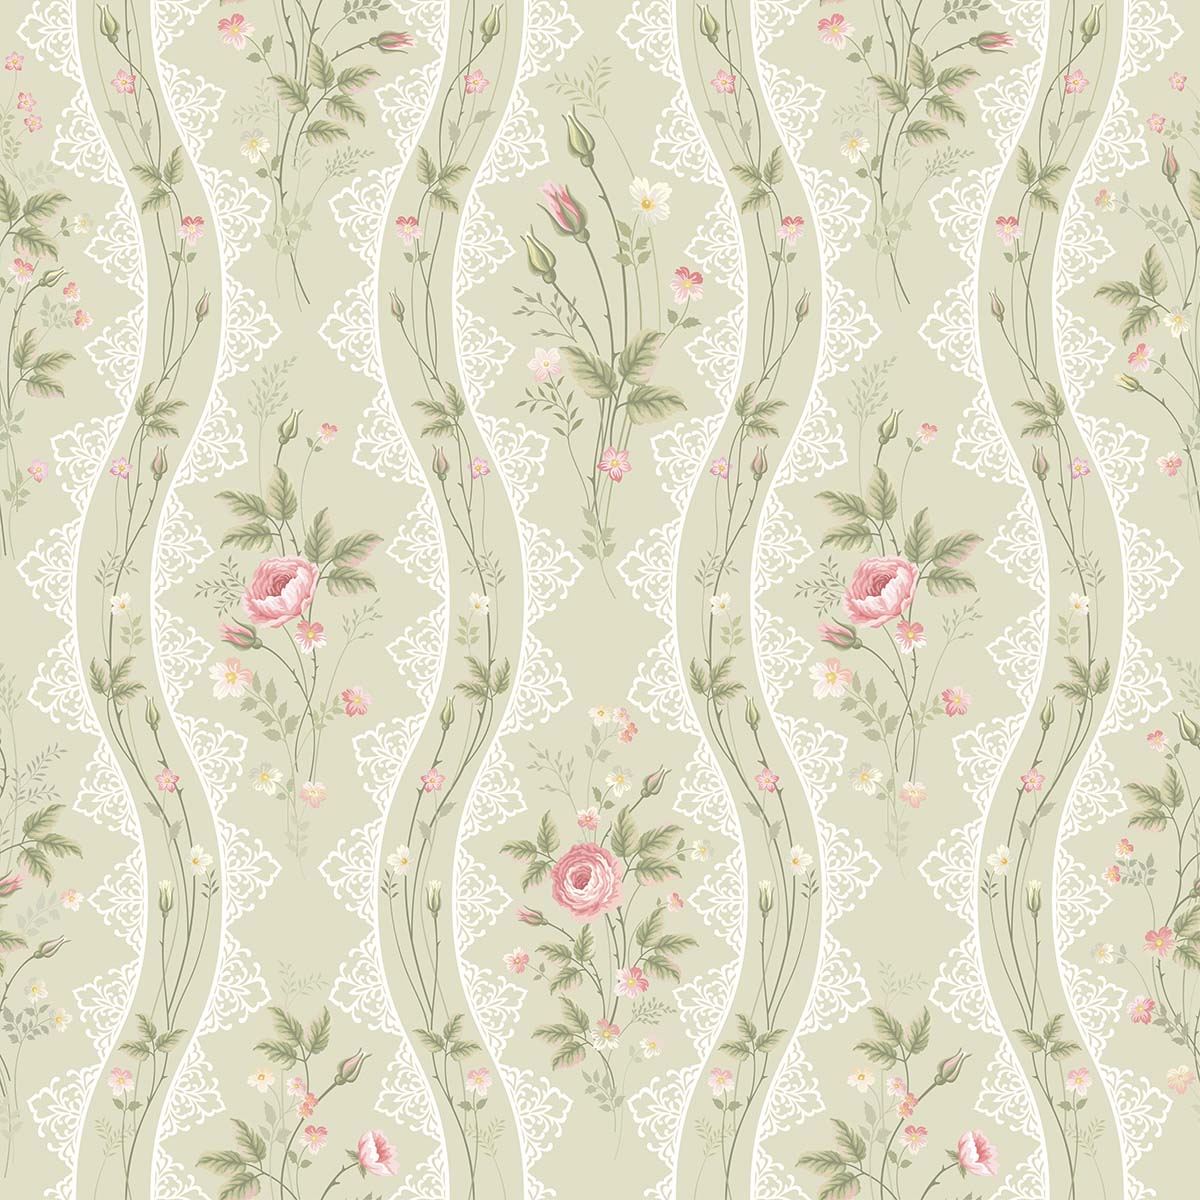 A wallpaper with flowers and lace